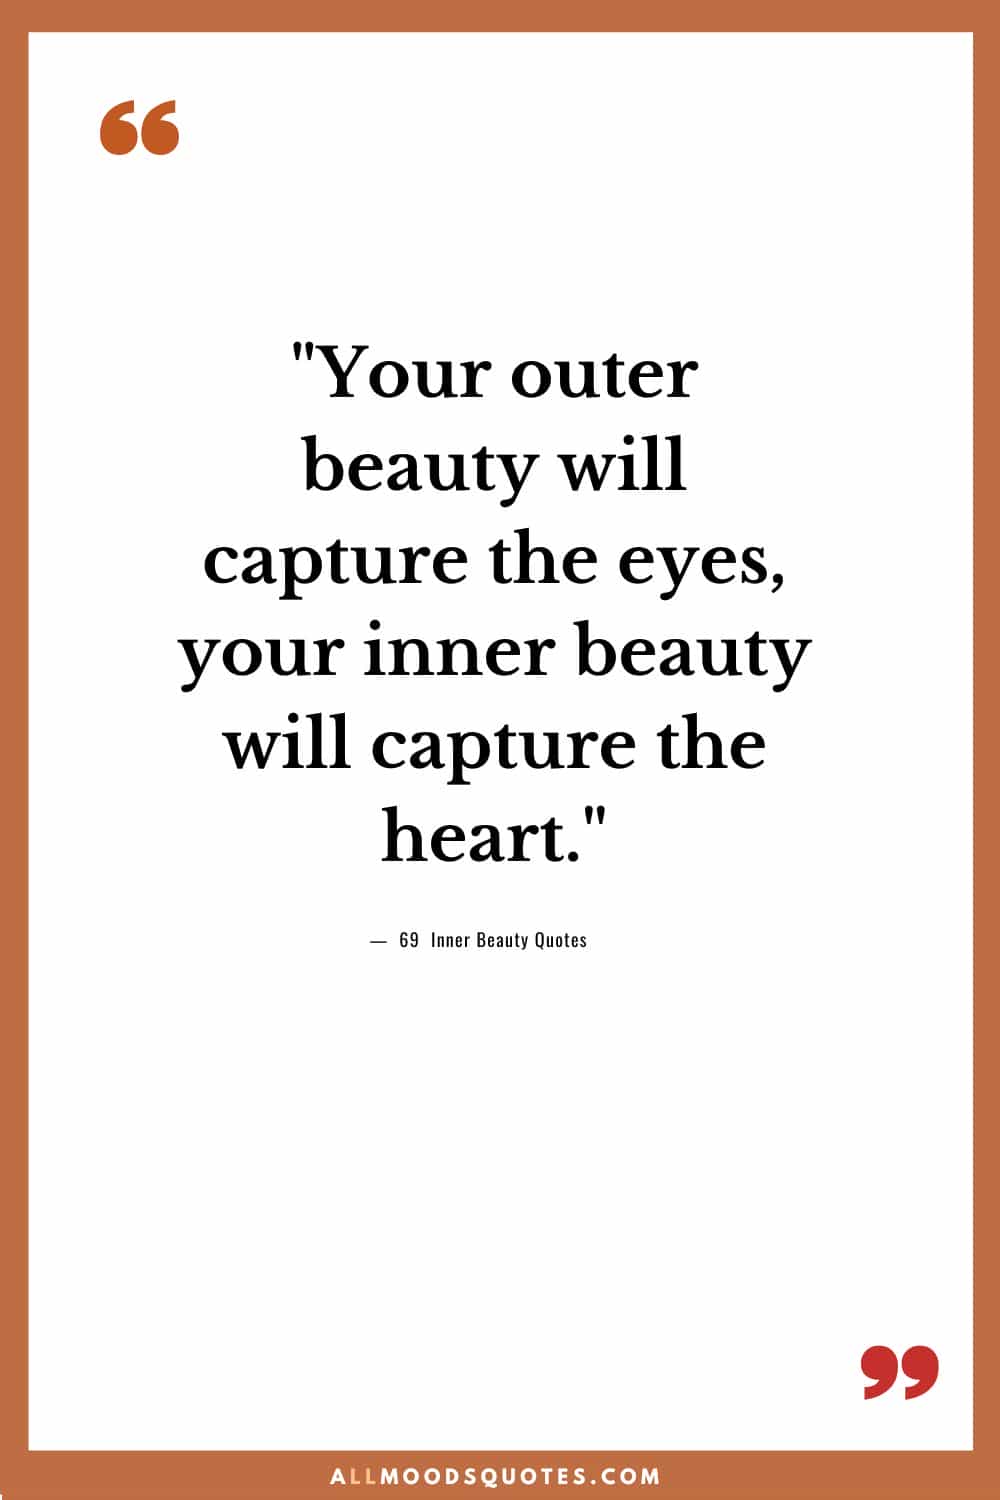 "Your outer beauty will capture the eyes, your inner beauty will capture the heart."